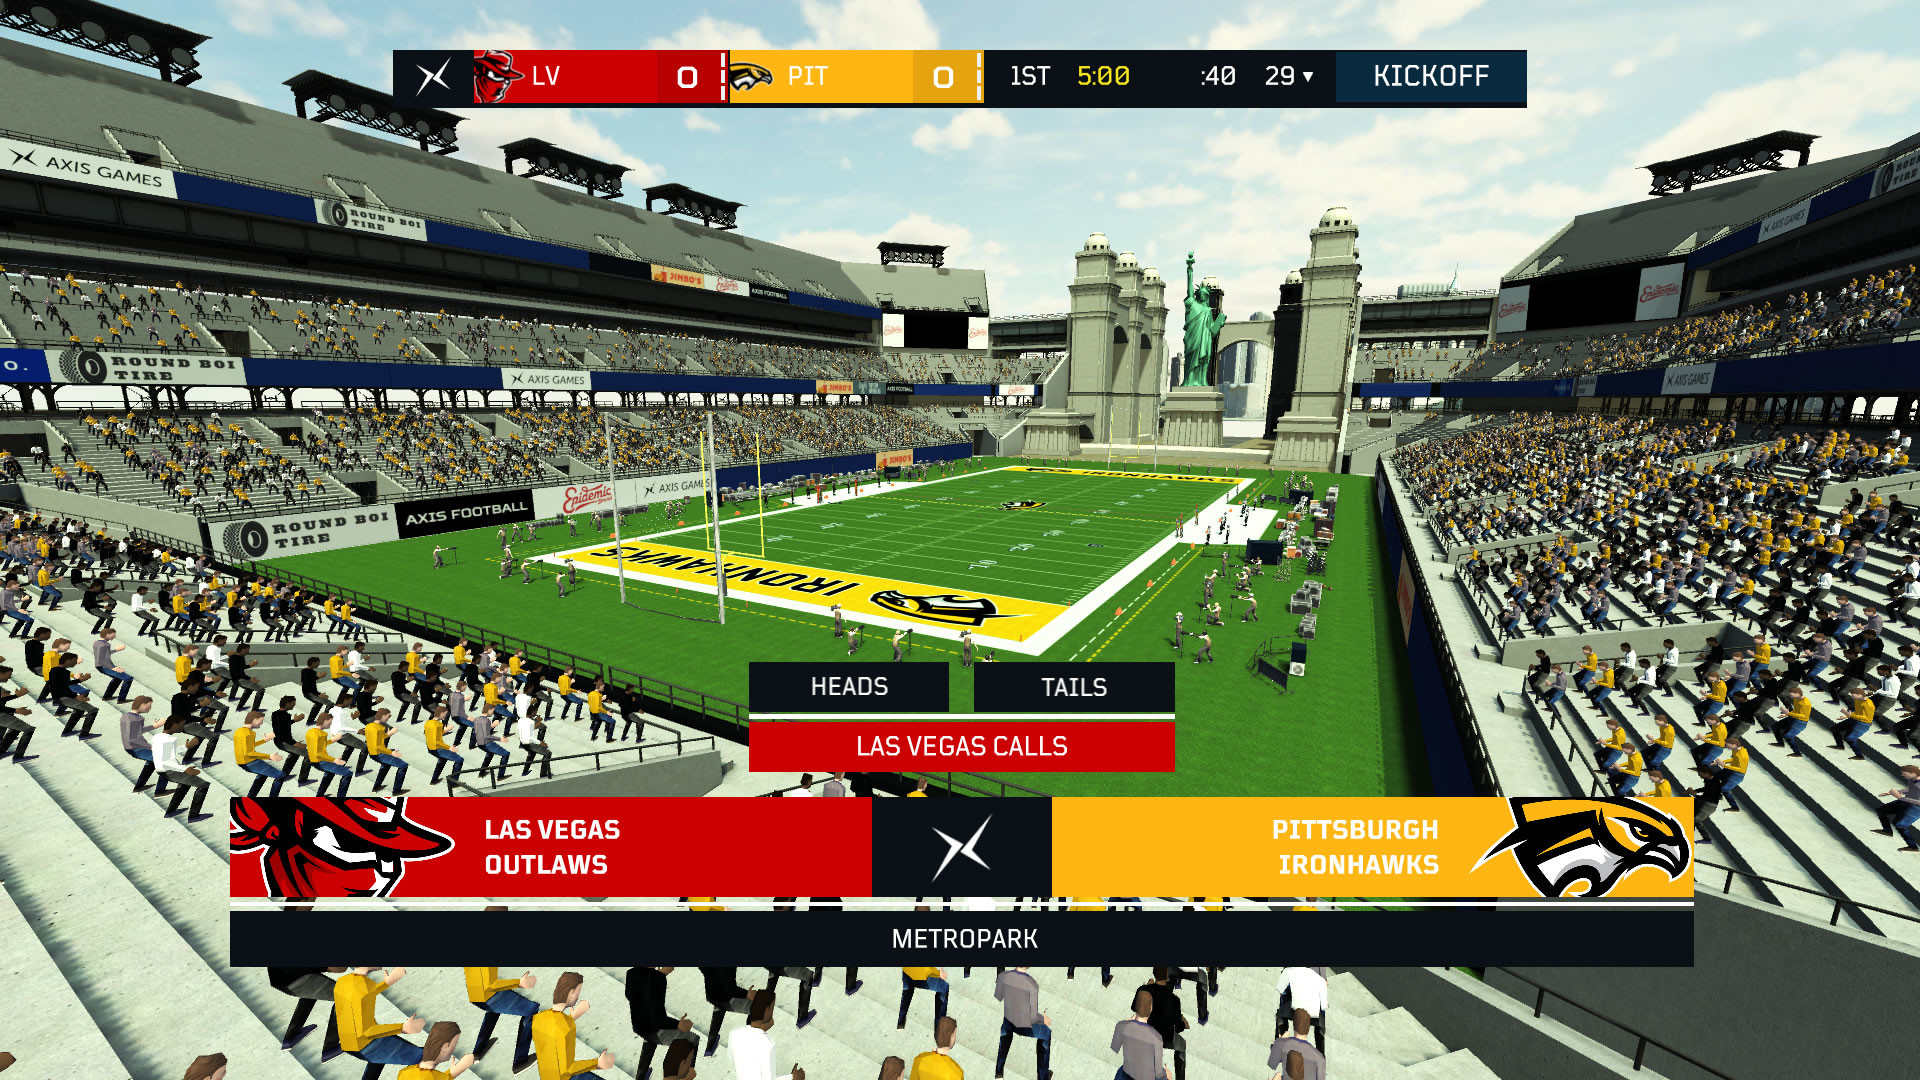 Axis Football 2019 Free Download